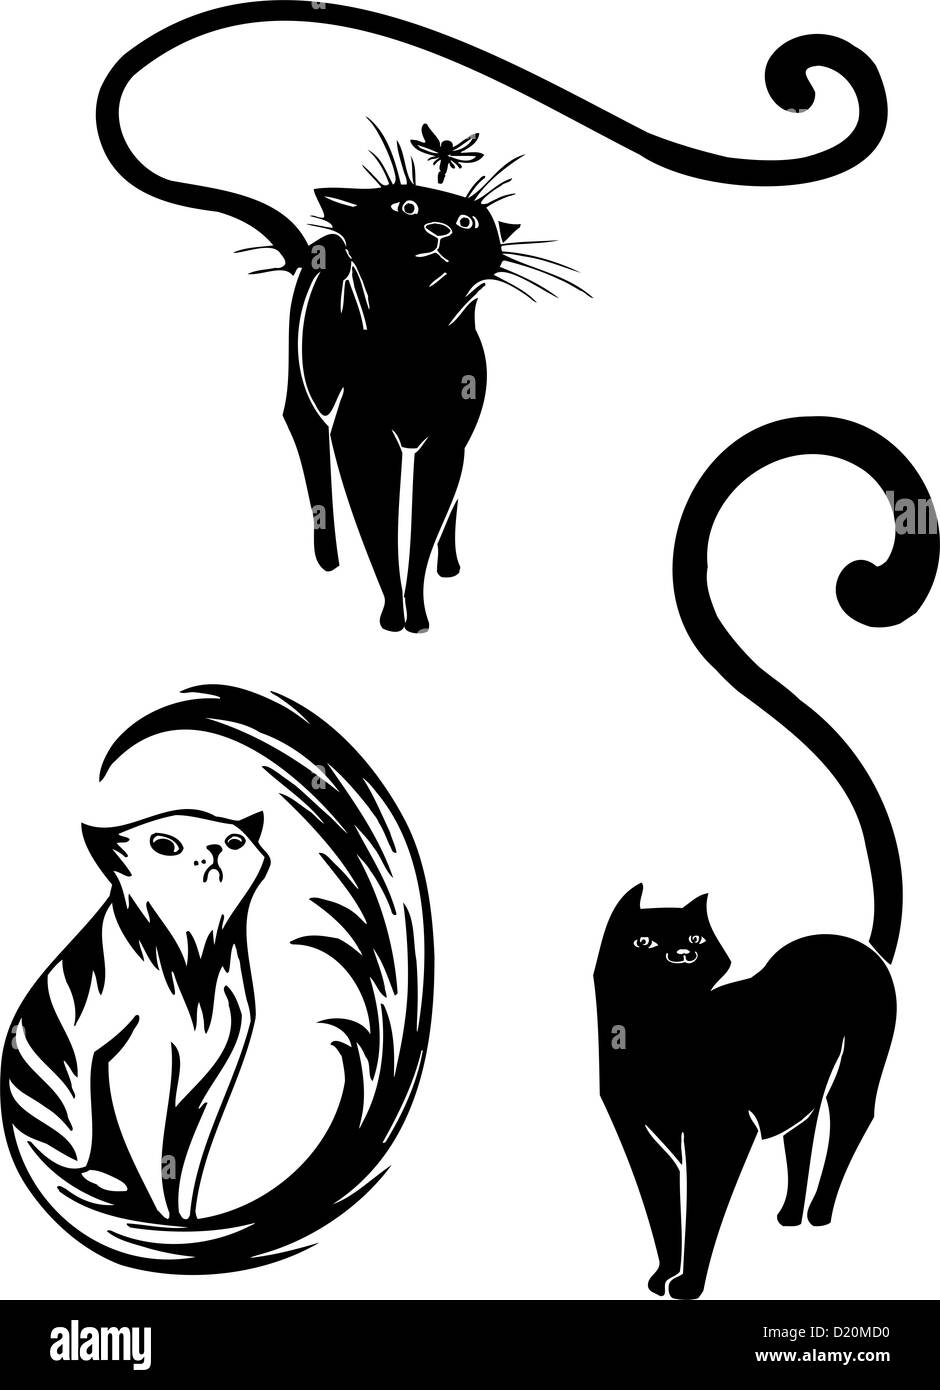 Stylized Cats - elegance and graceful cats. Stock Photo